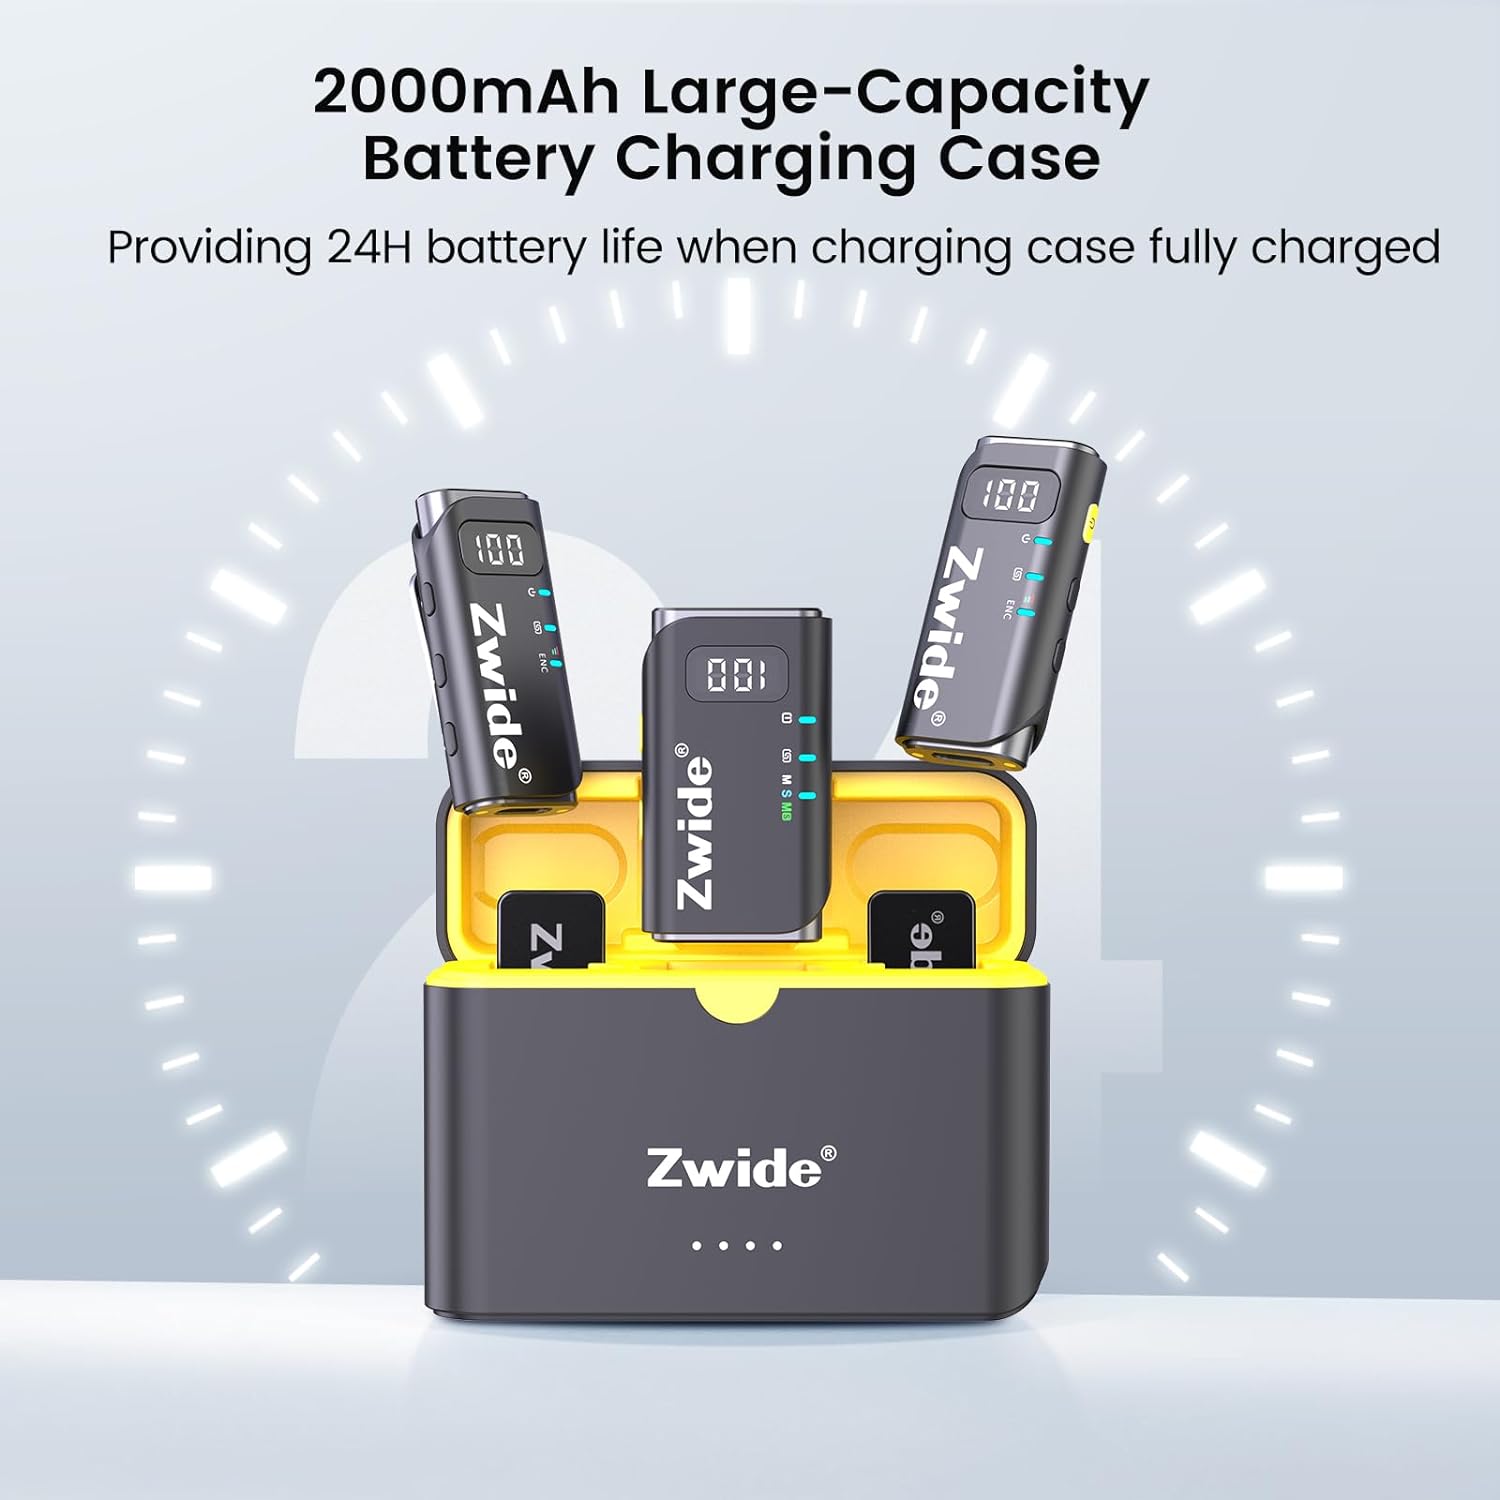 Zwide Wireless Lavalier Microphone System with Charging Case M4(1to2)+C4, 3 Levels Noise Cancellation, Compact Mini Lapel Mics with Magnetic Clip for DSLR/SLR Camera/Camcorder/iPhone/Android Phones